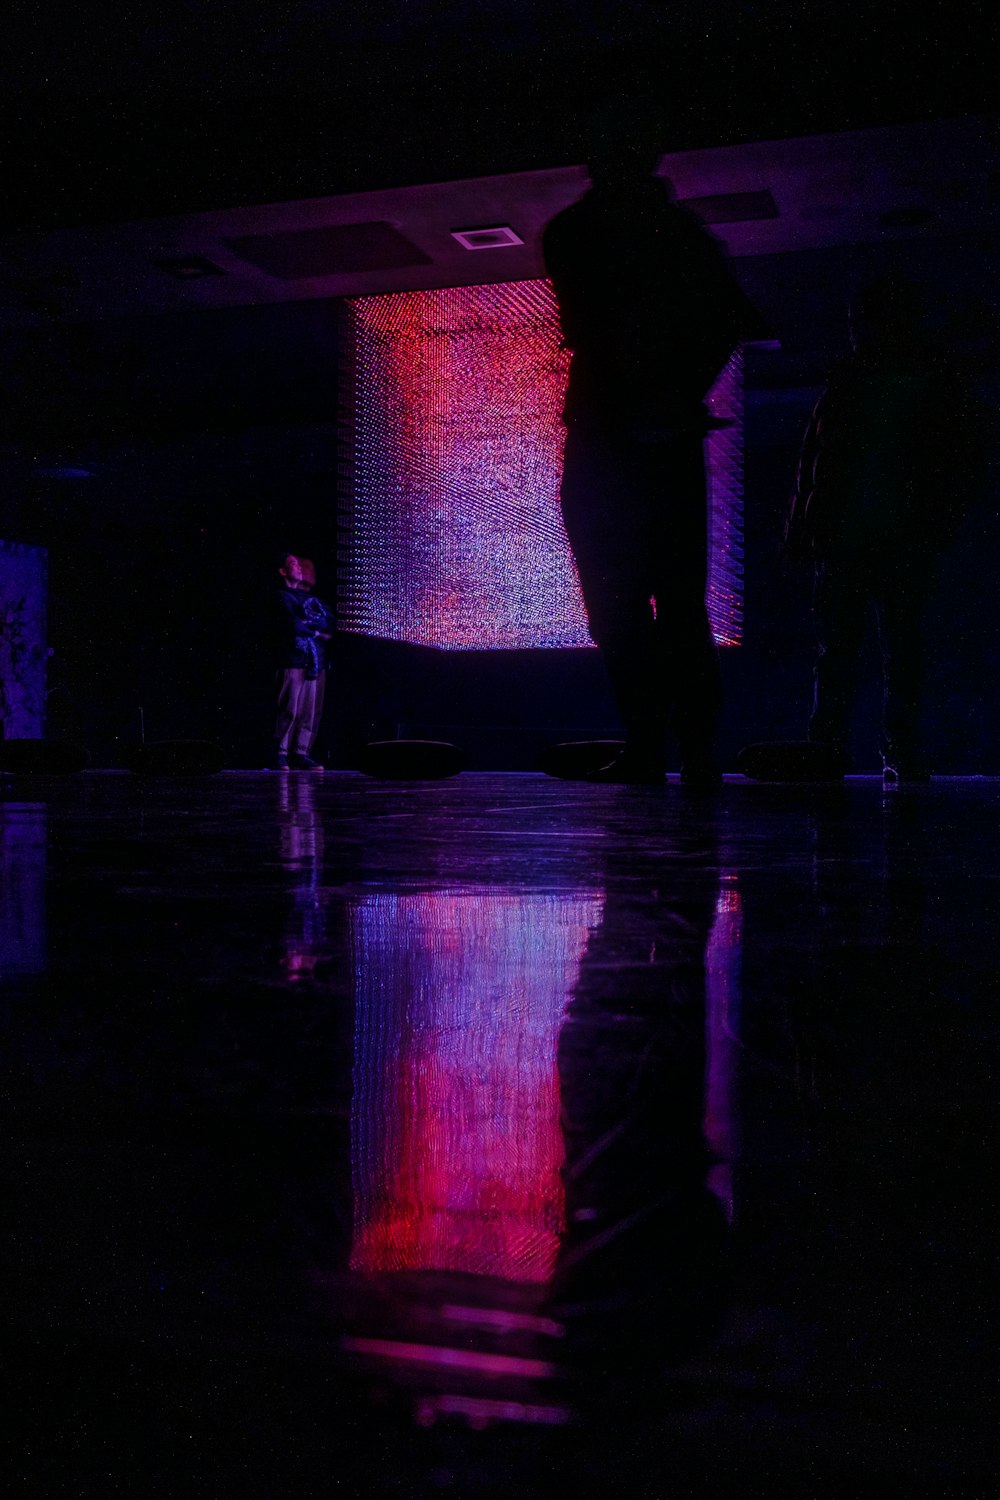 a person standing in a dark room with a reflection on the floor